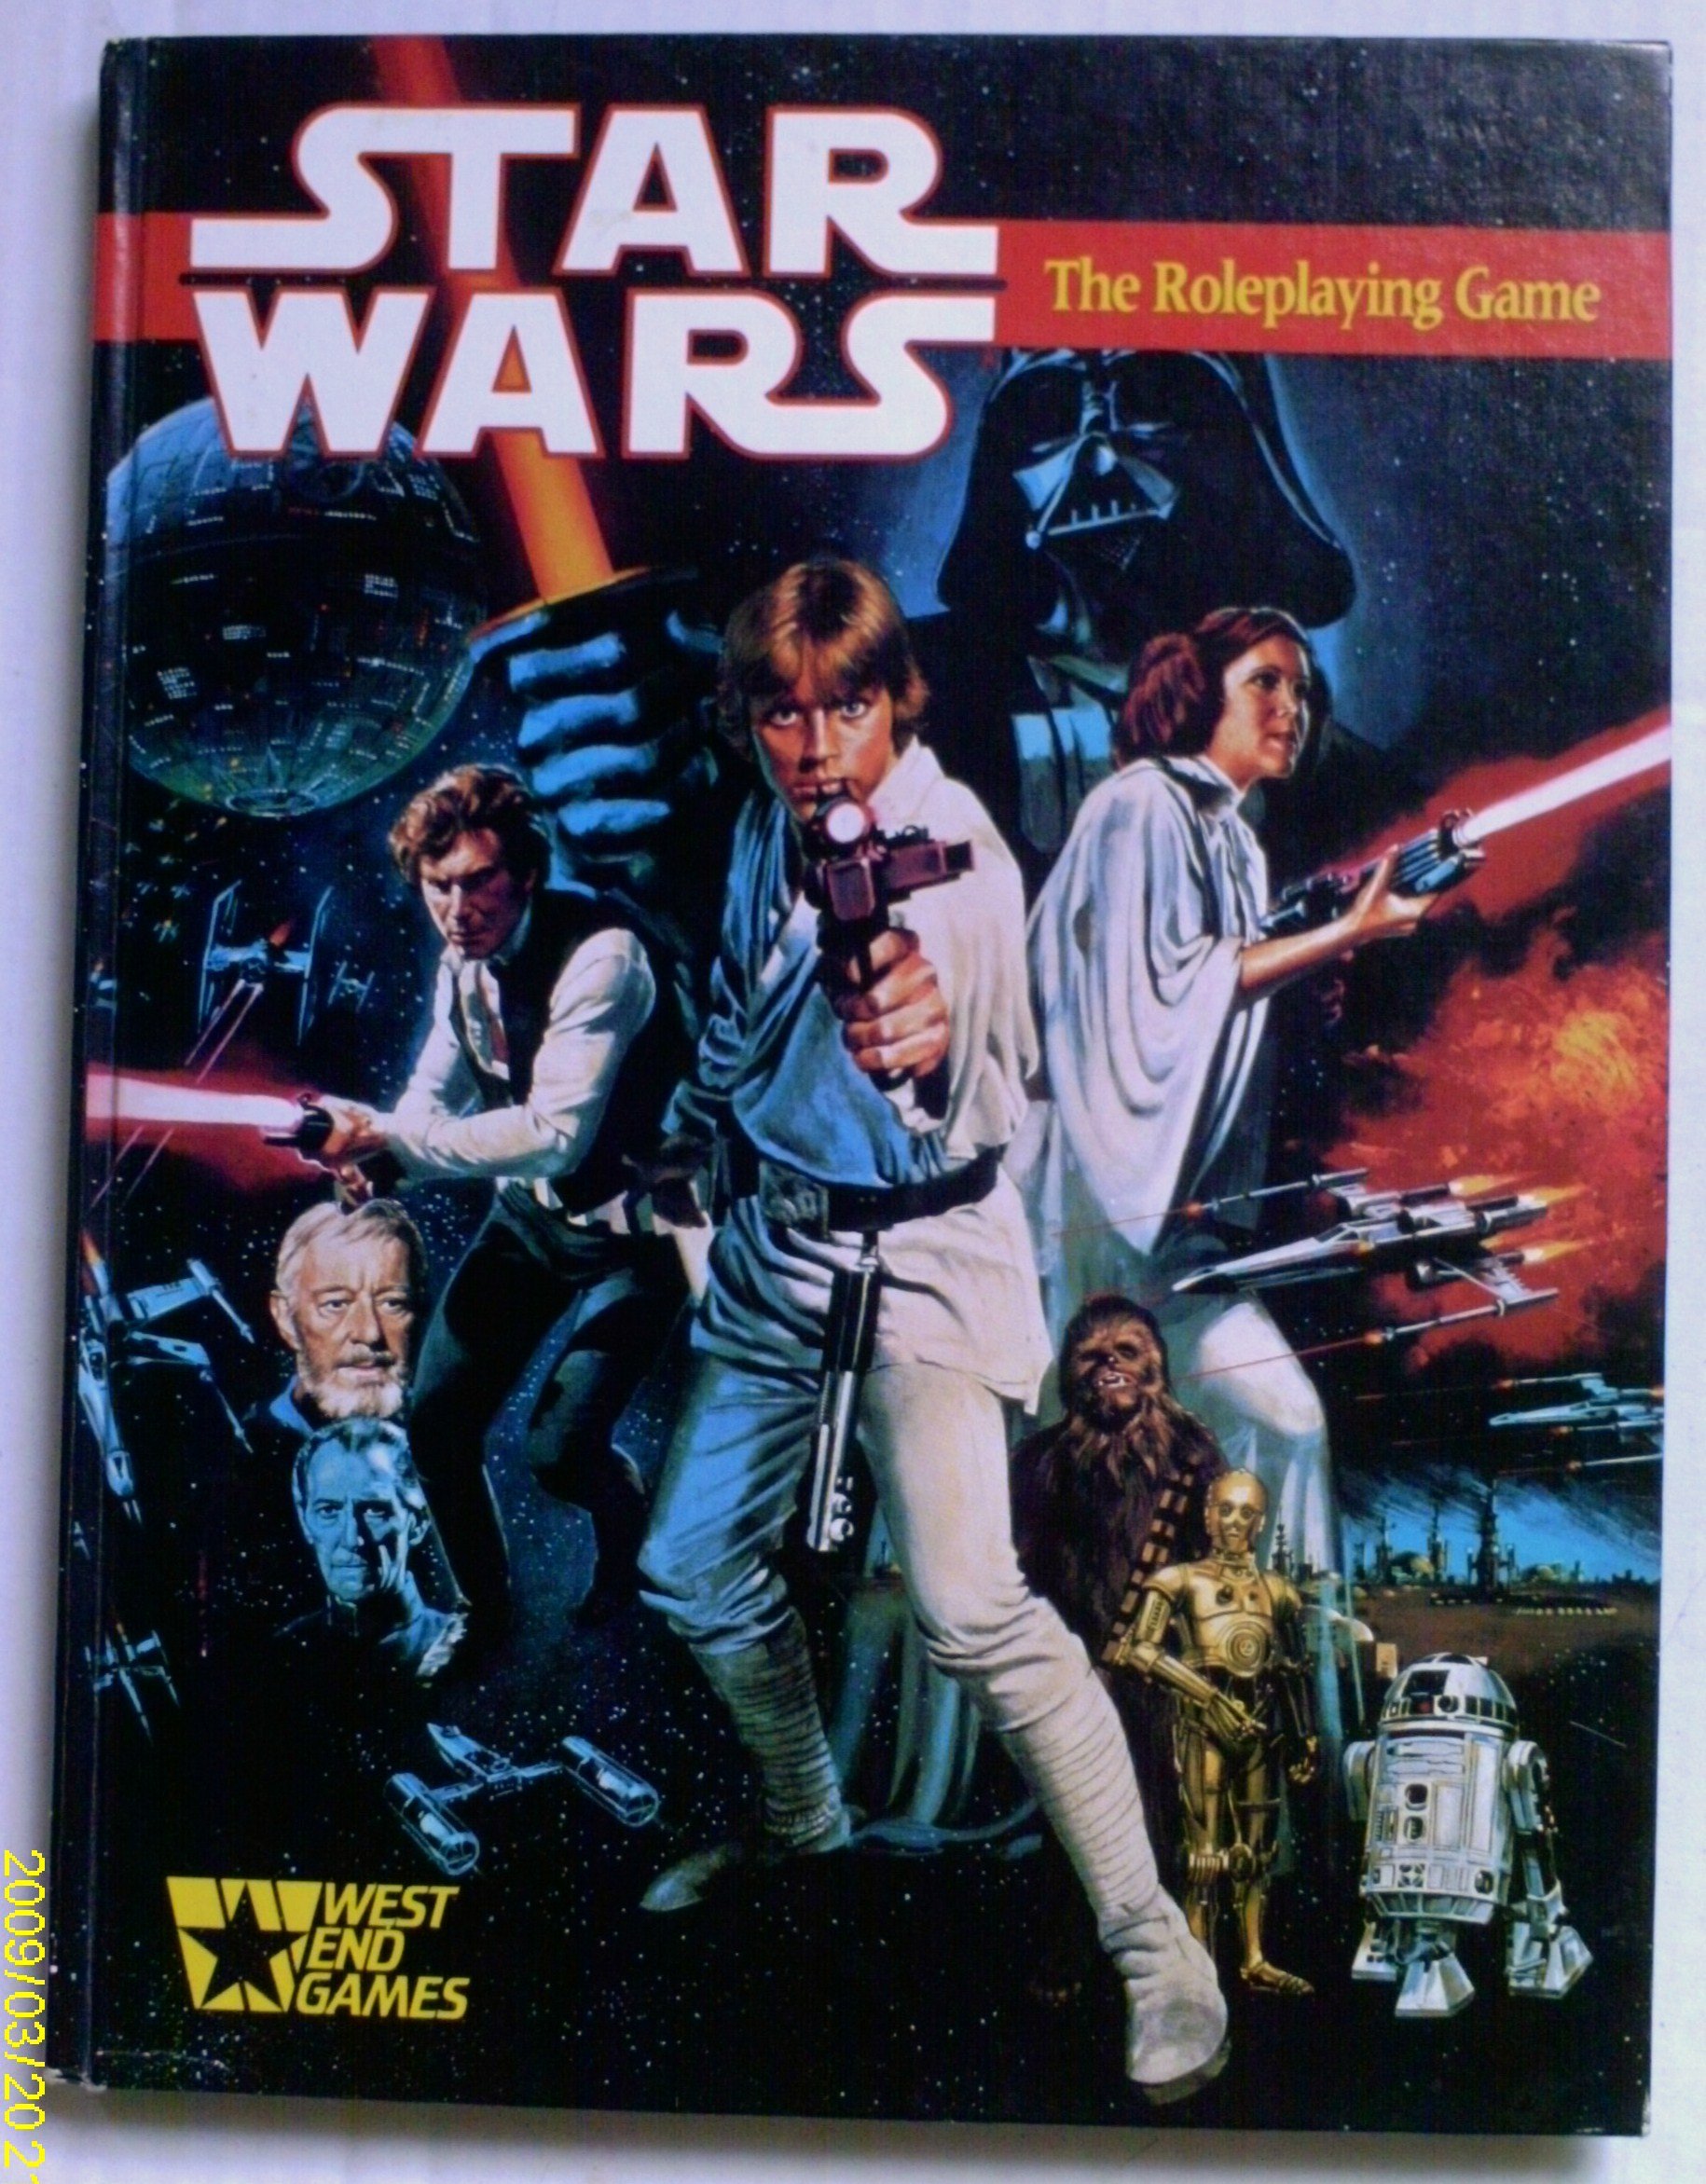 West End Games Star Wars D6 Part 1: History and Introduction 